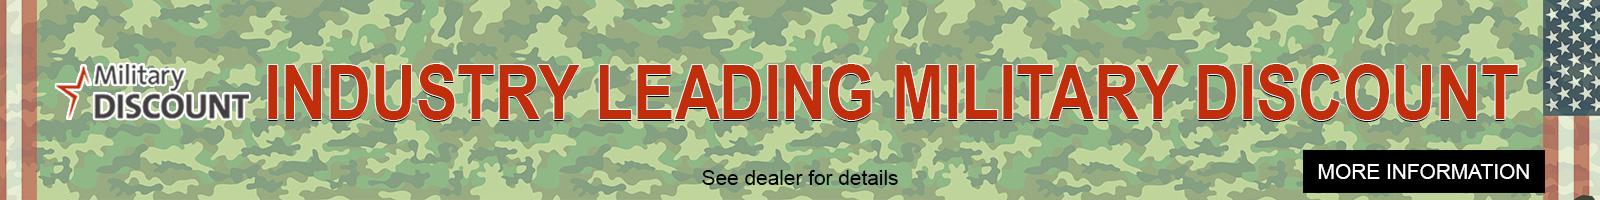 Industry Leading Military Discount 